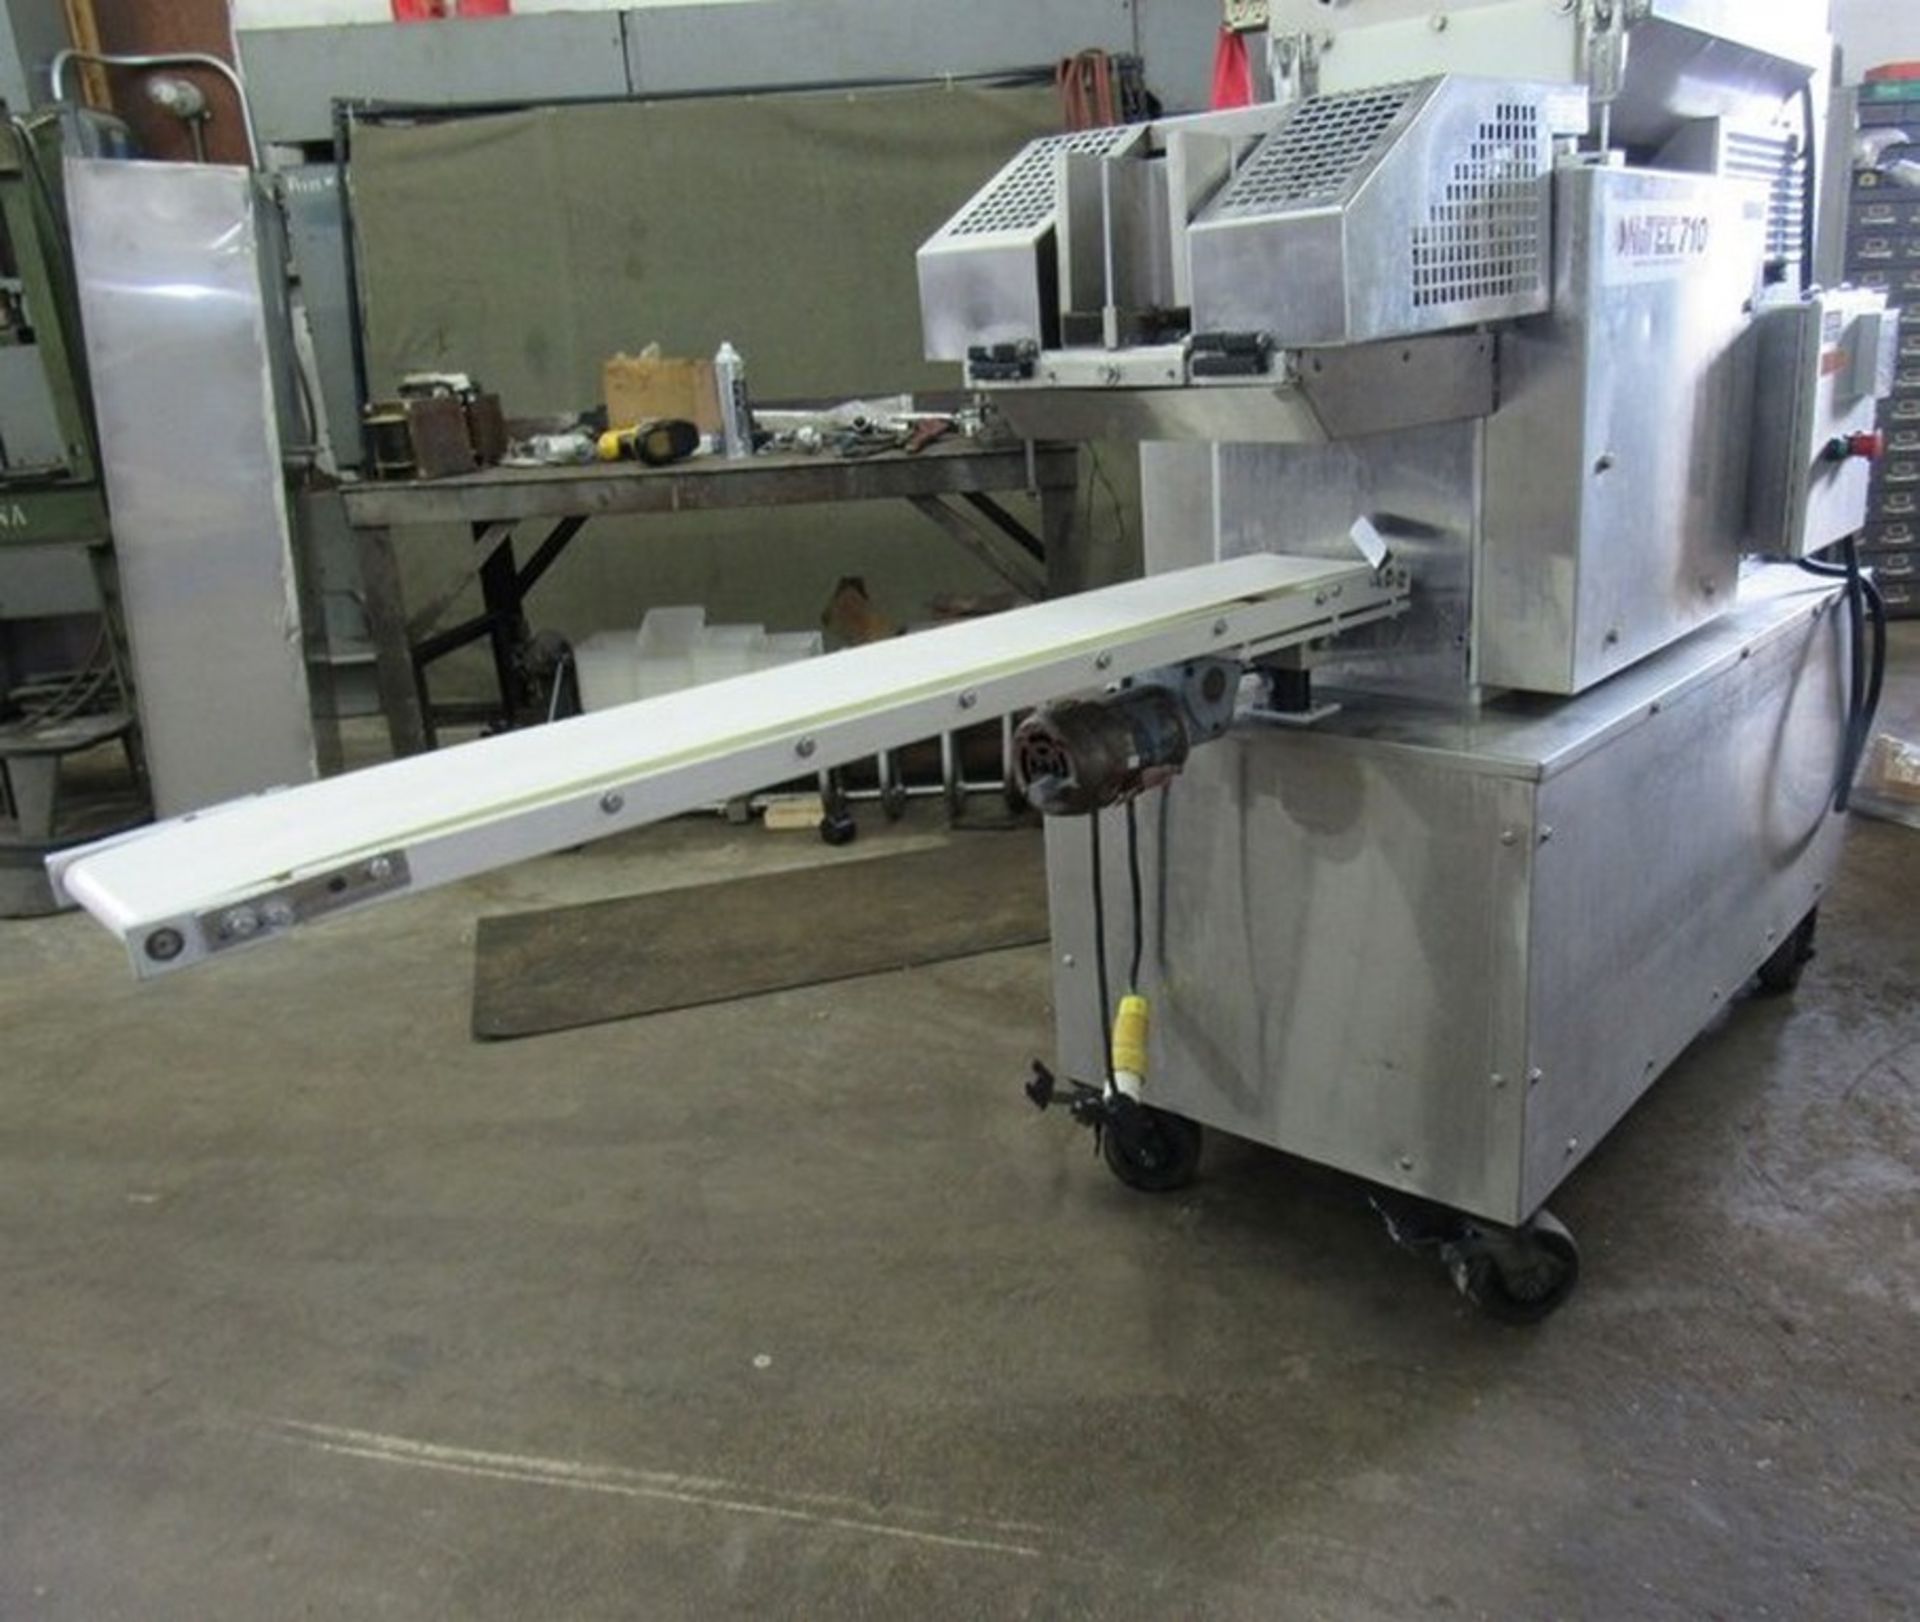 Nutec Manufacturing 710 S/S Patty Former with Paper Feed Inserter, Dual Auger Agitator with